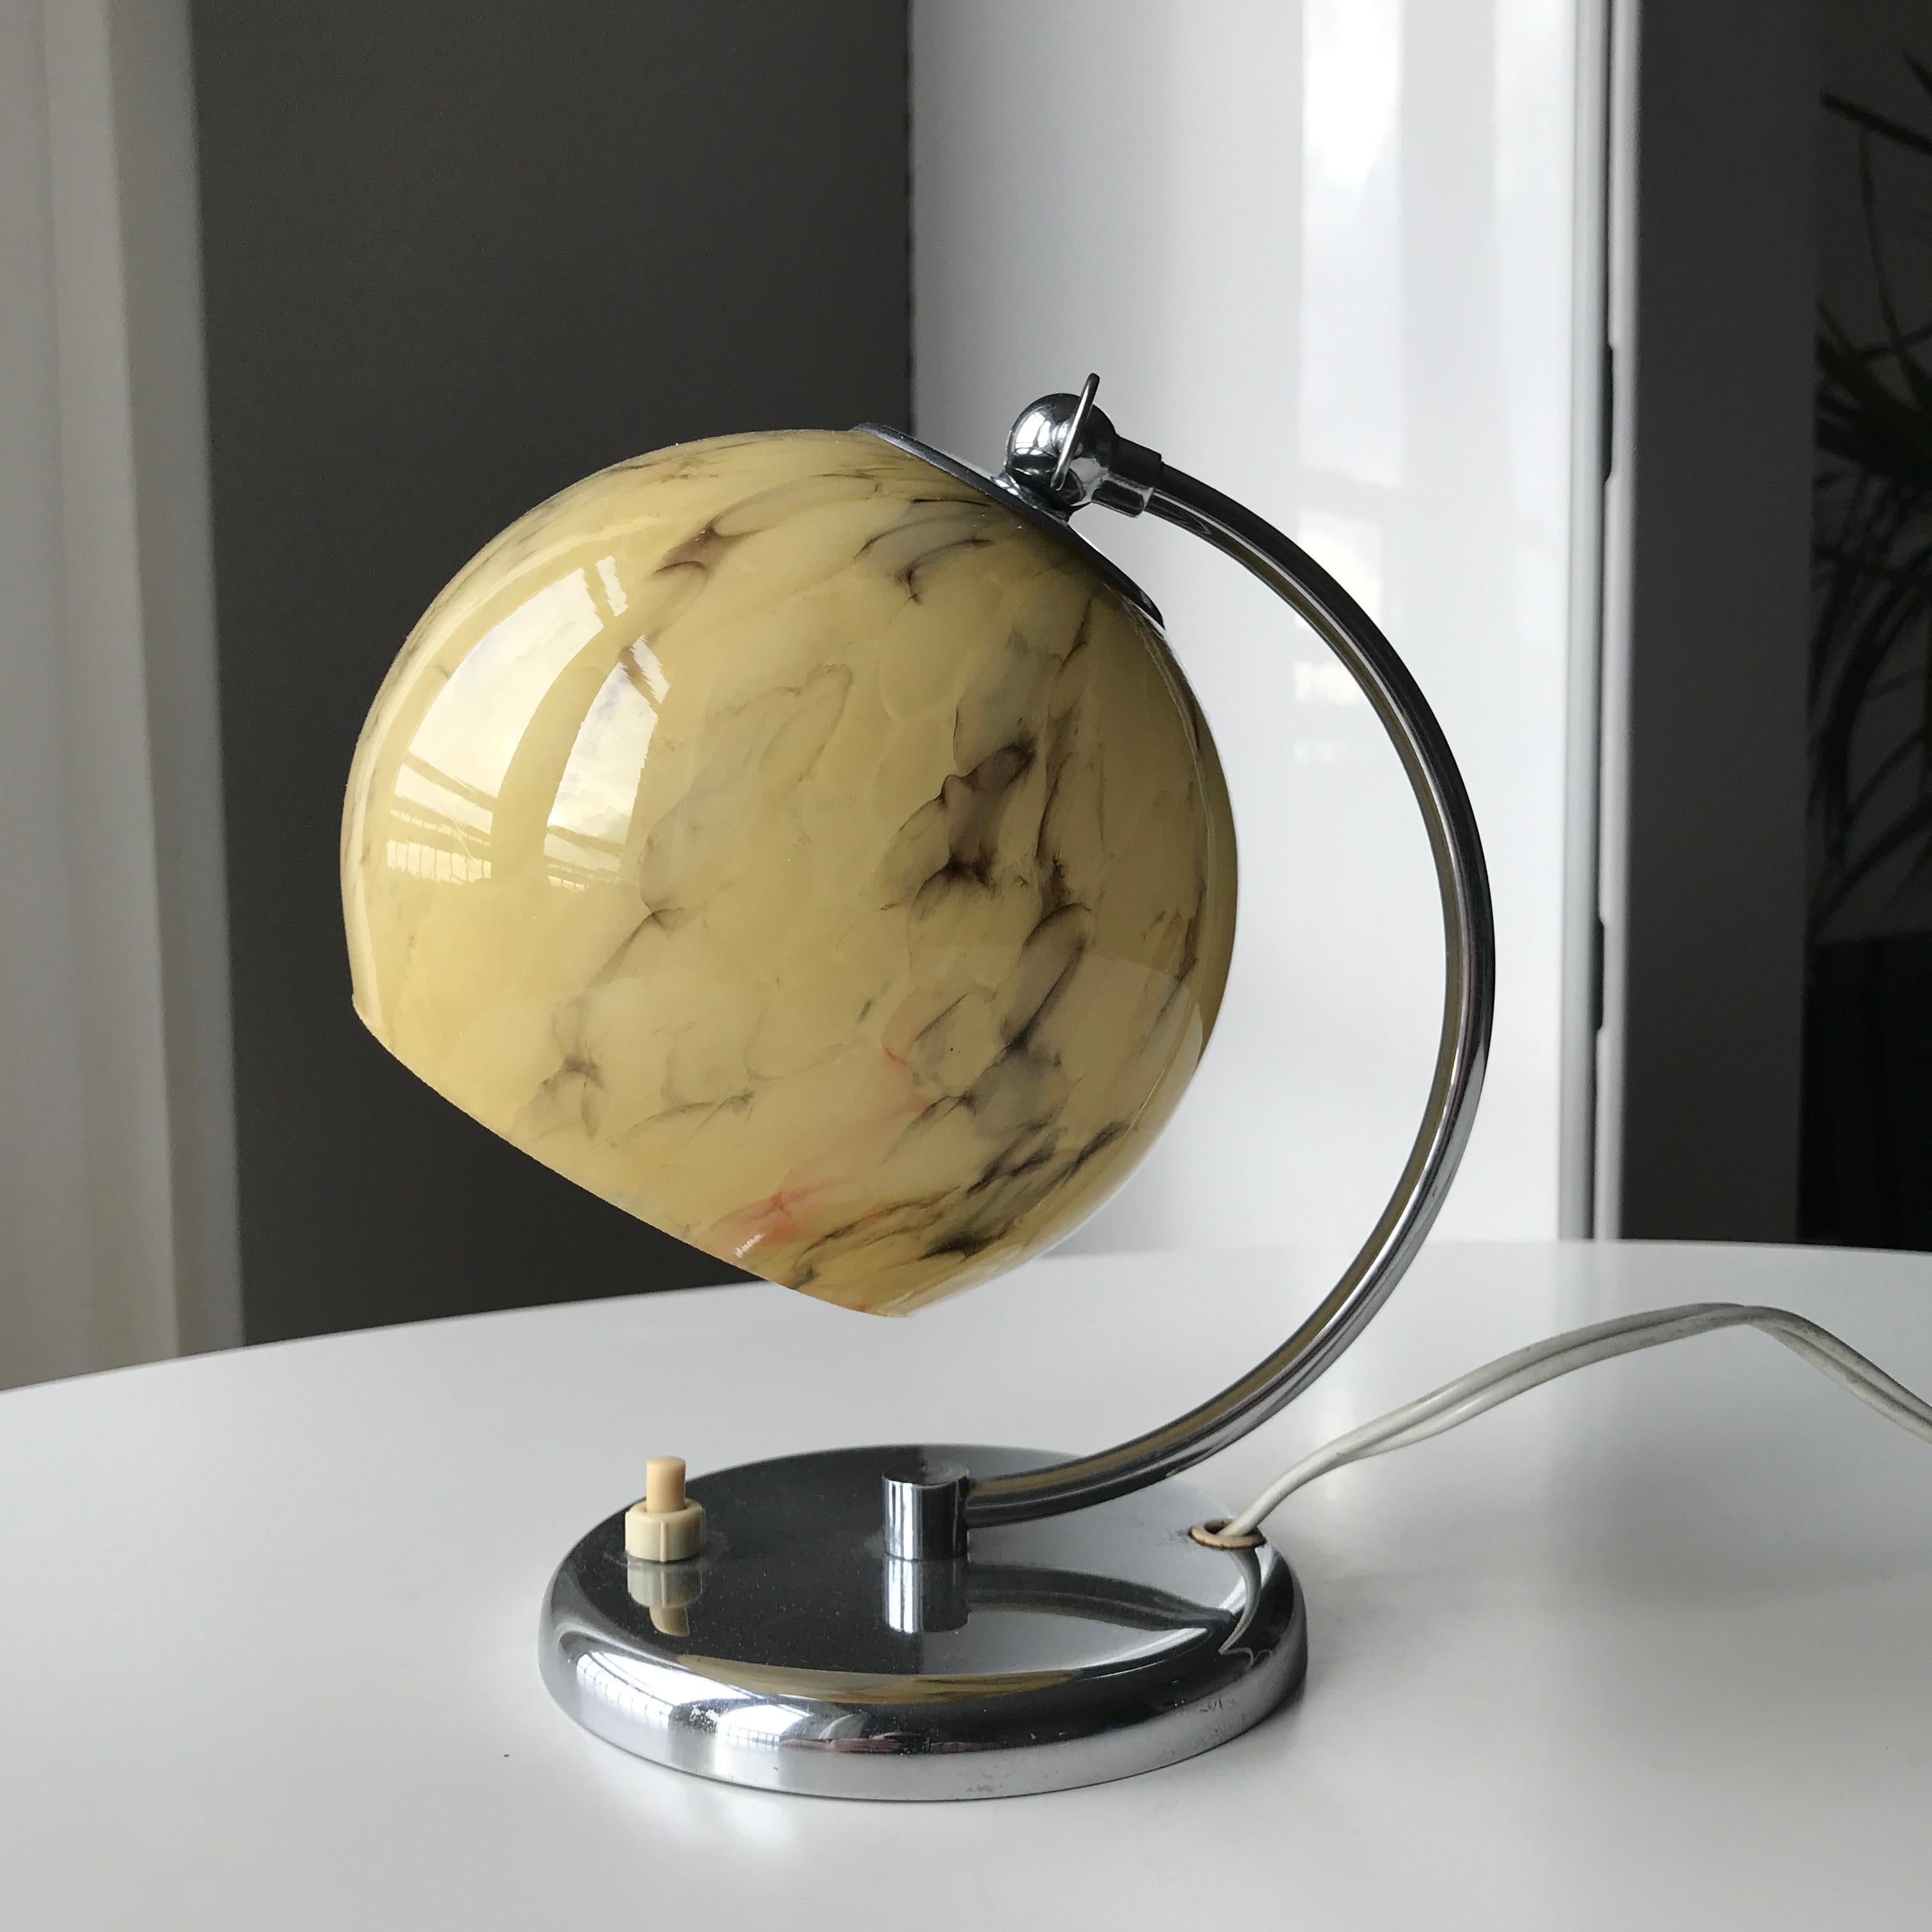 Hand-Crafted Art Deco Danish Fog and Mørup Desk Lamp with Opaline Shade, 1920s For Sale